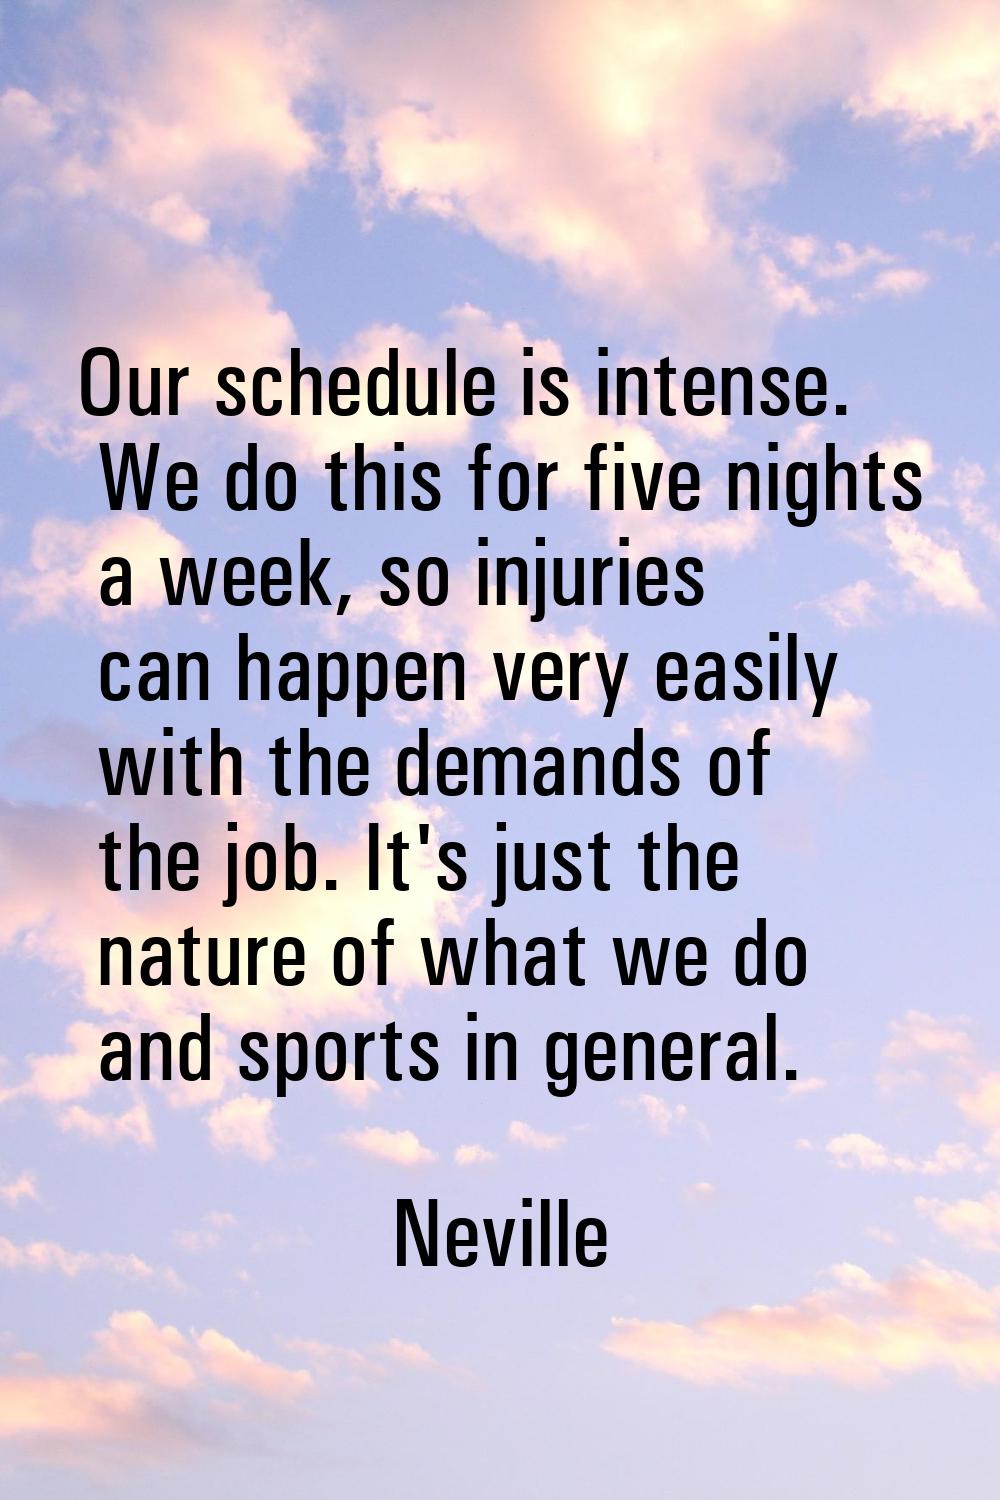 Our schedule is intense. We do this for five nights a week, so injuries can happen very easily with